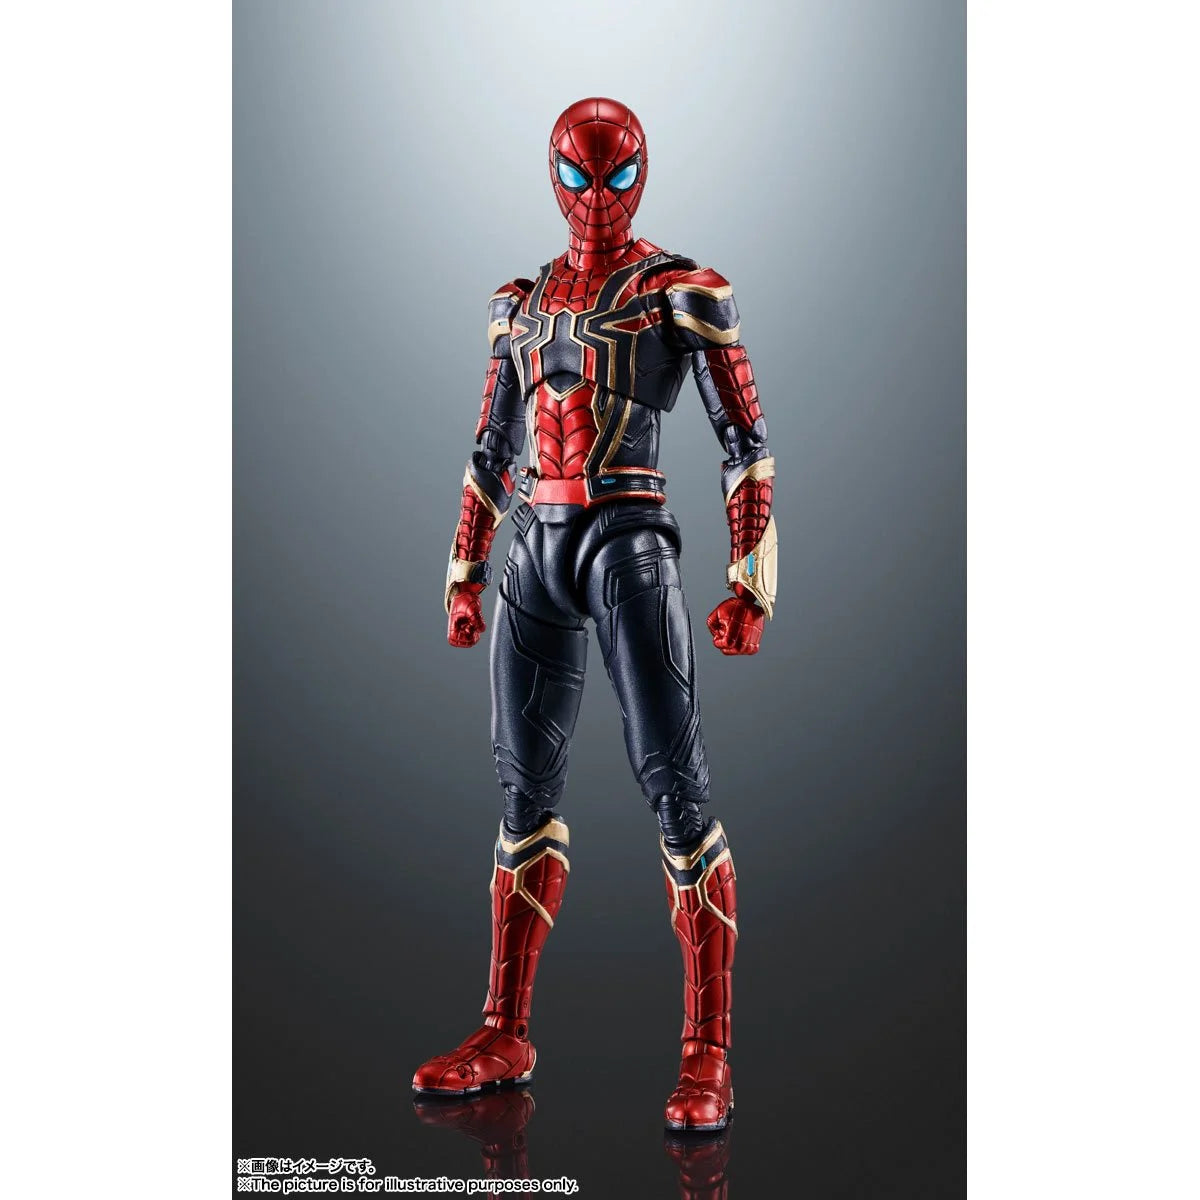 Spider-Man: No Way Home Iron Spider Action Figure by SH Figuarts -SH Figuarts - India - www.superherotoystore.com